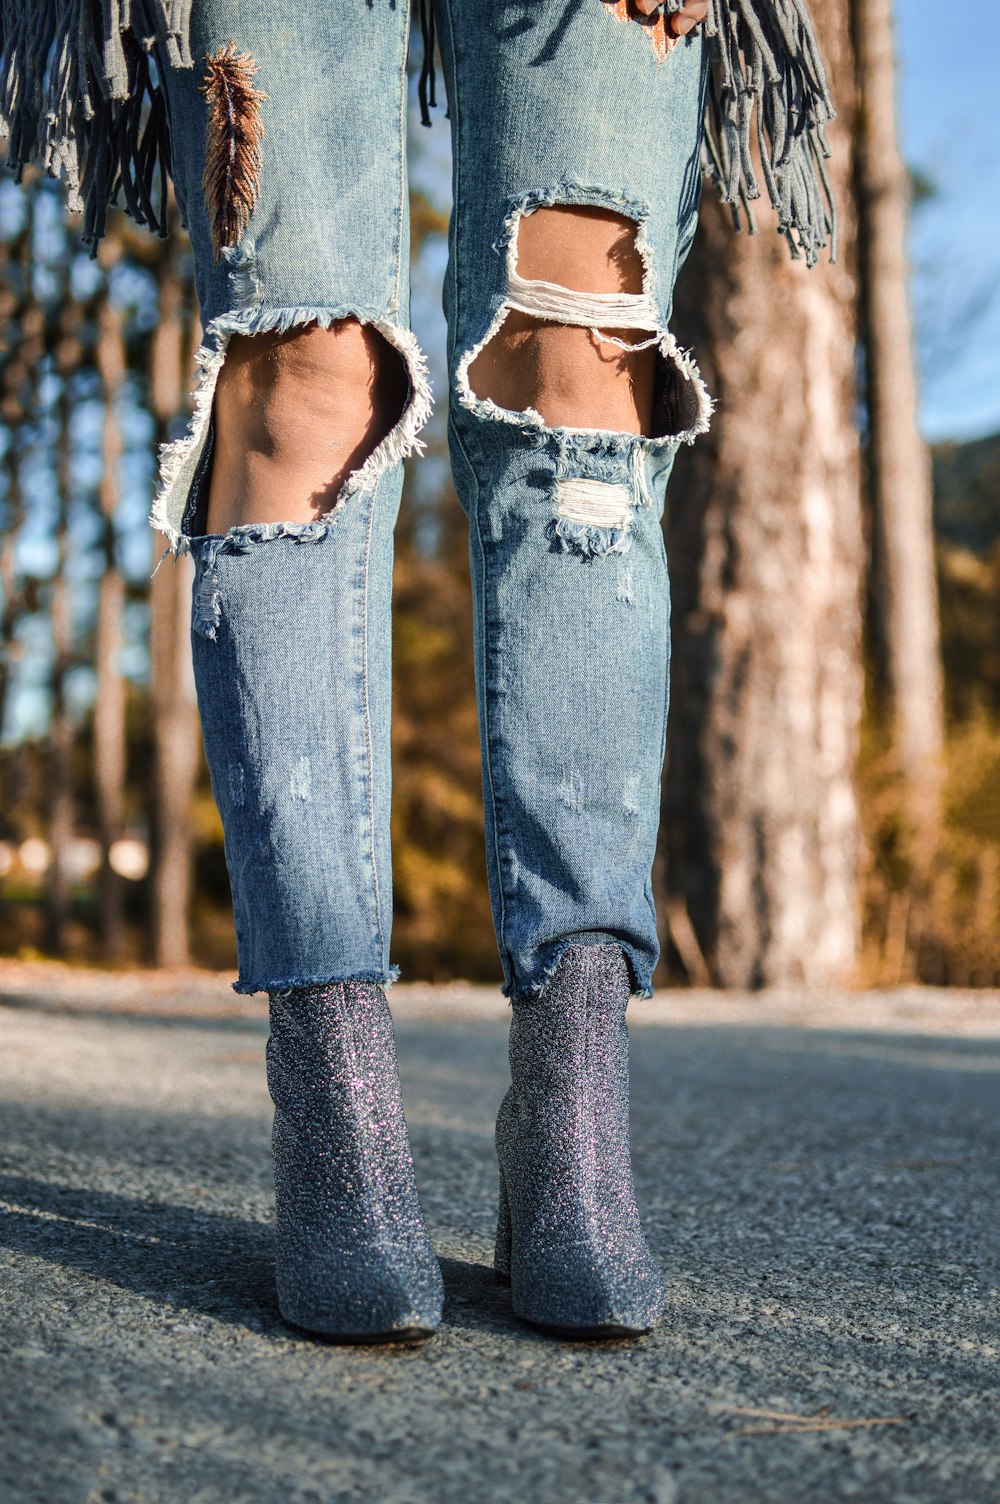 Jeans Fashion Pictures | Download Free Images on Unsplash